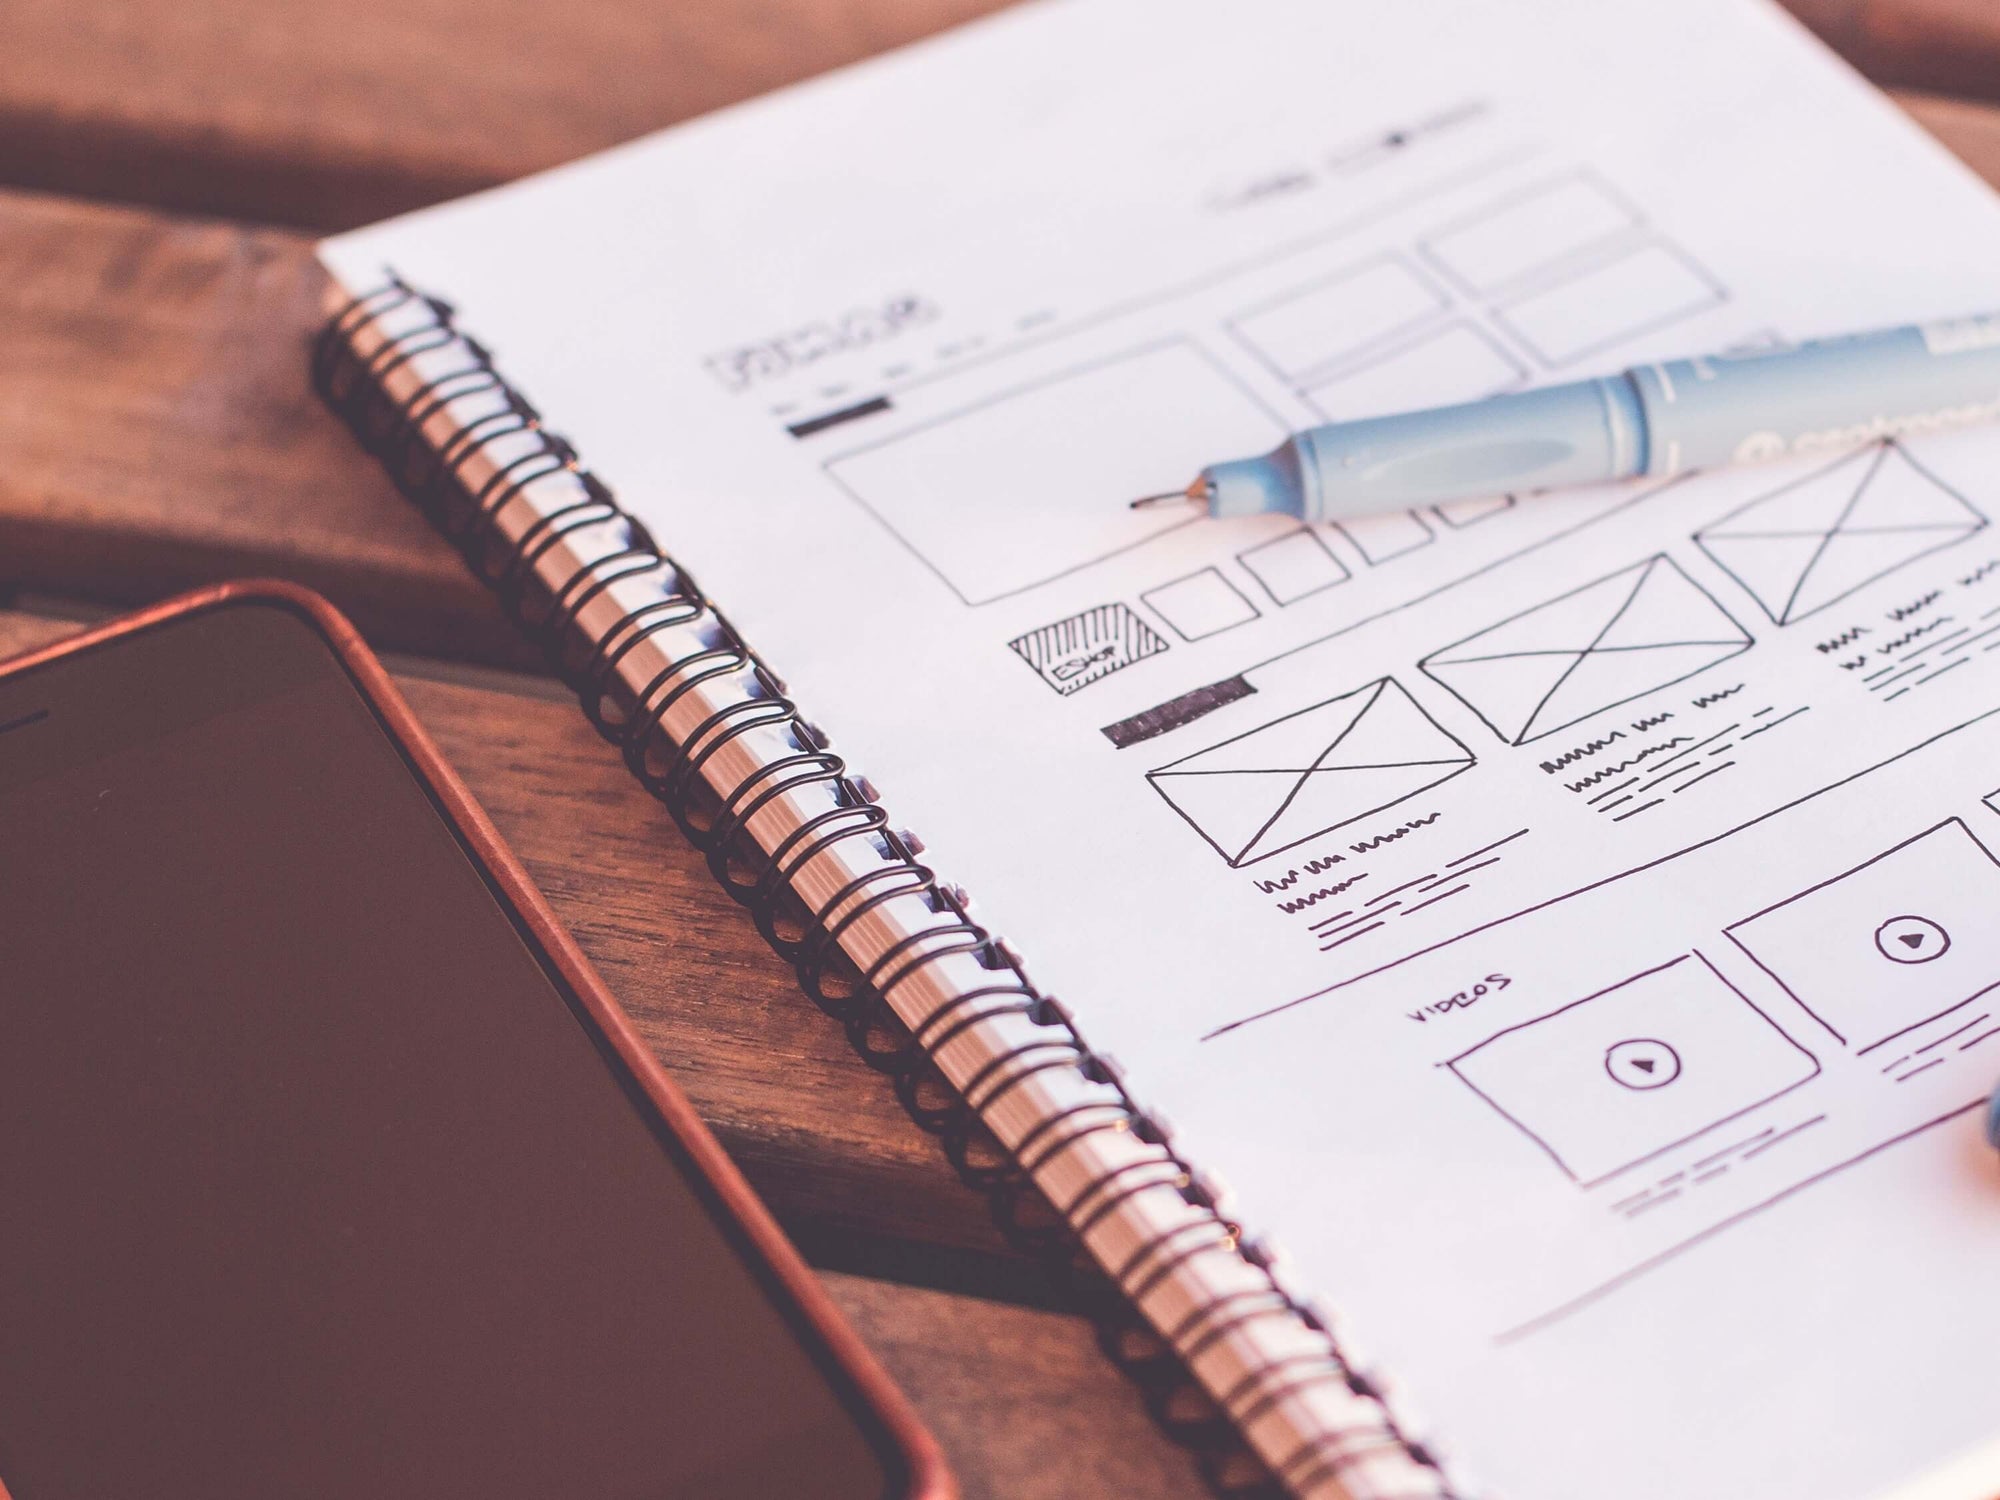 Our guide to great website design for small businesses